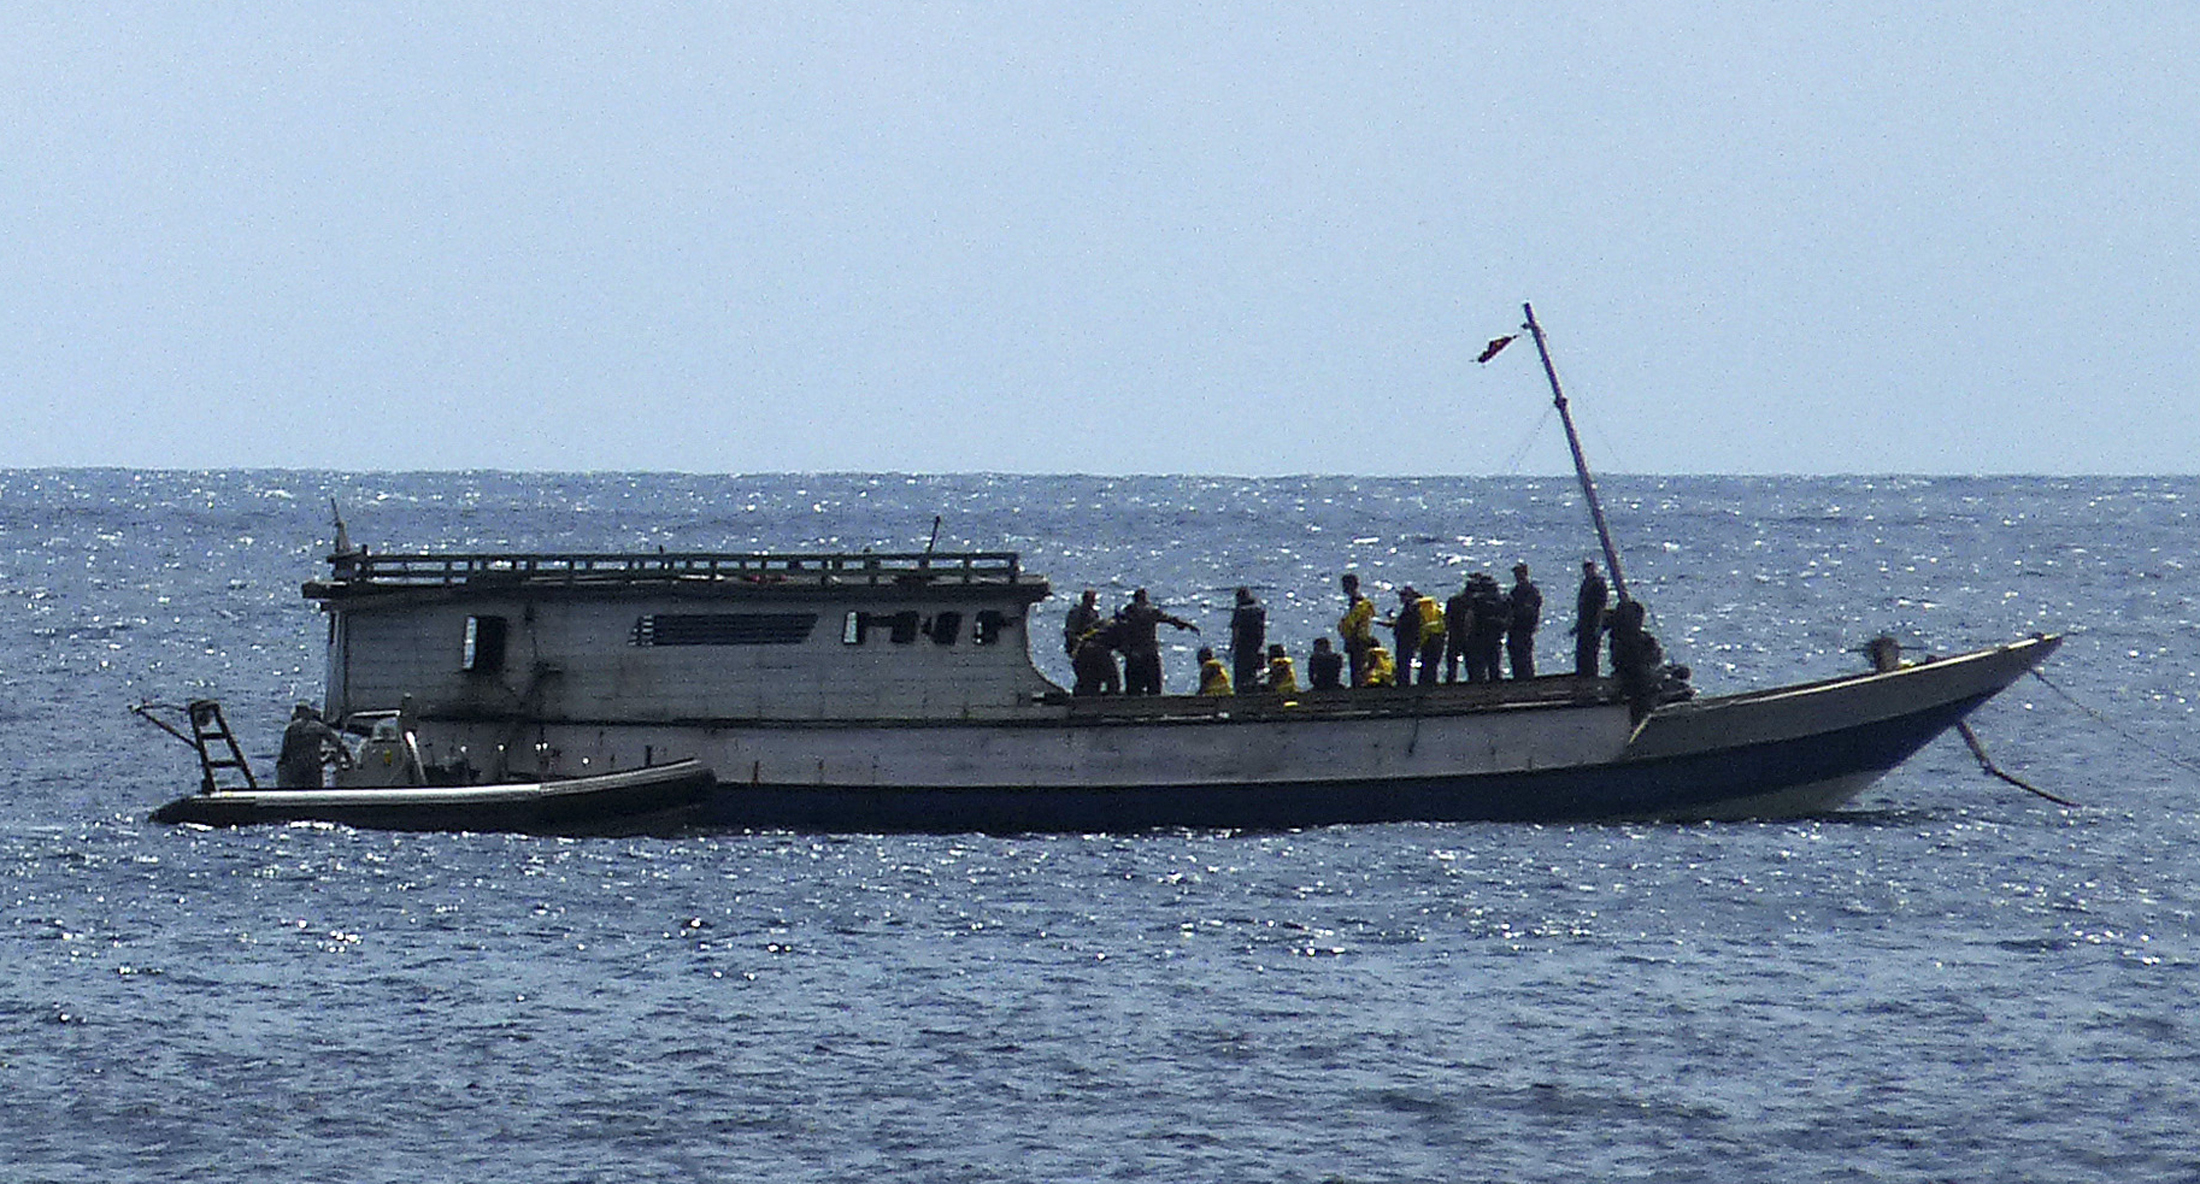 Australian Navy boat comes alongside a boat carrying 50 asylum seekers after it arrived at Flying Fish Cove on Christmas Island